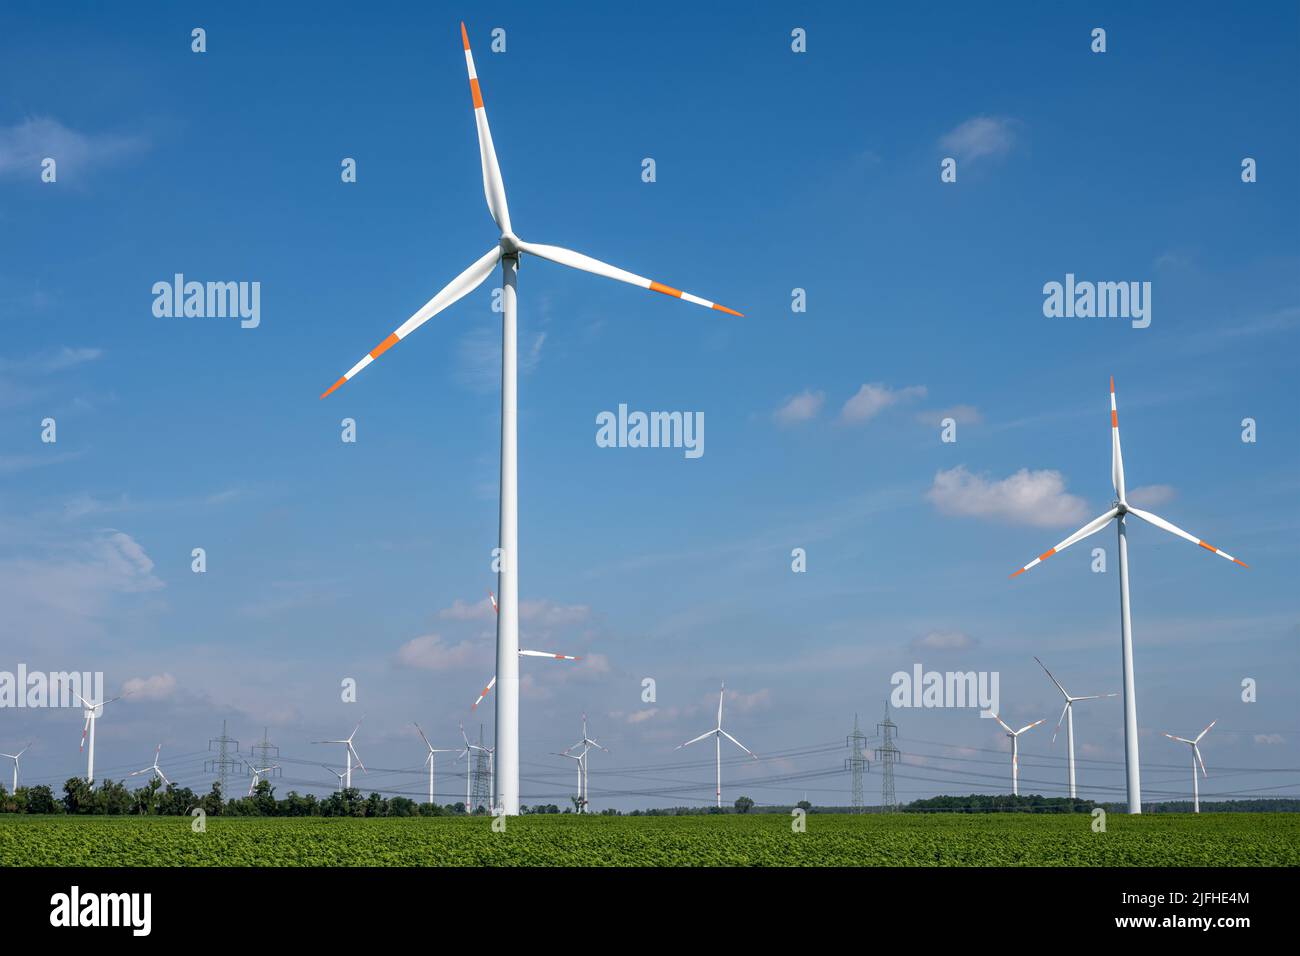 Wind turbines with power lines in the back seen in Germany Stock Photo